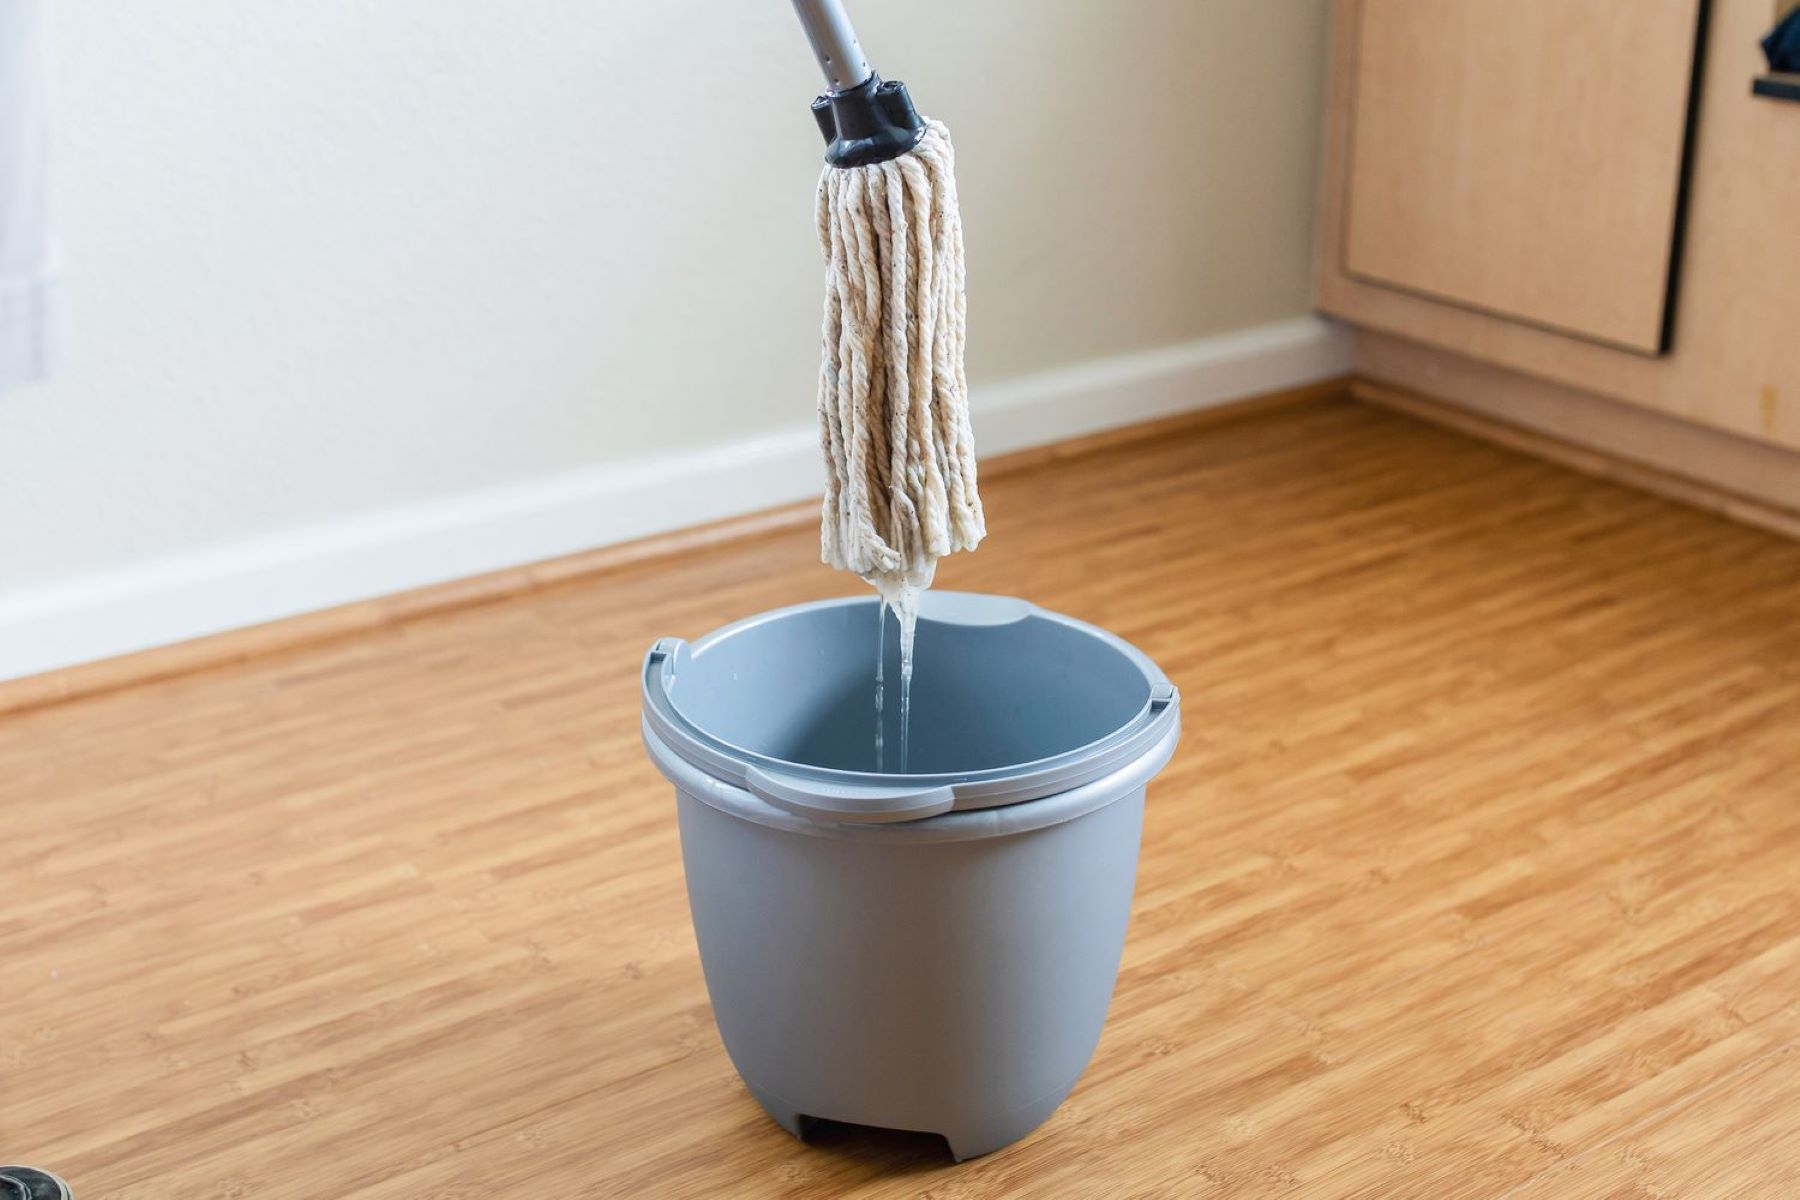 What Is The Correct Way To Handle A Bucket Of Dirty Mop Water?